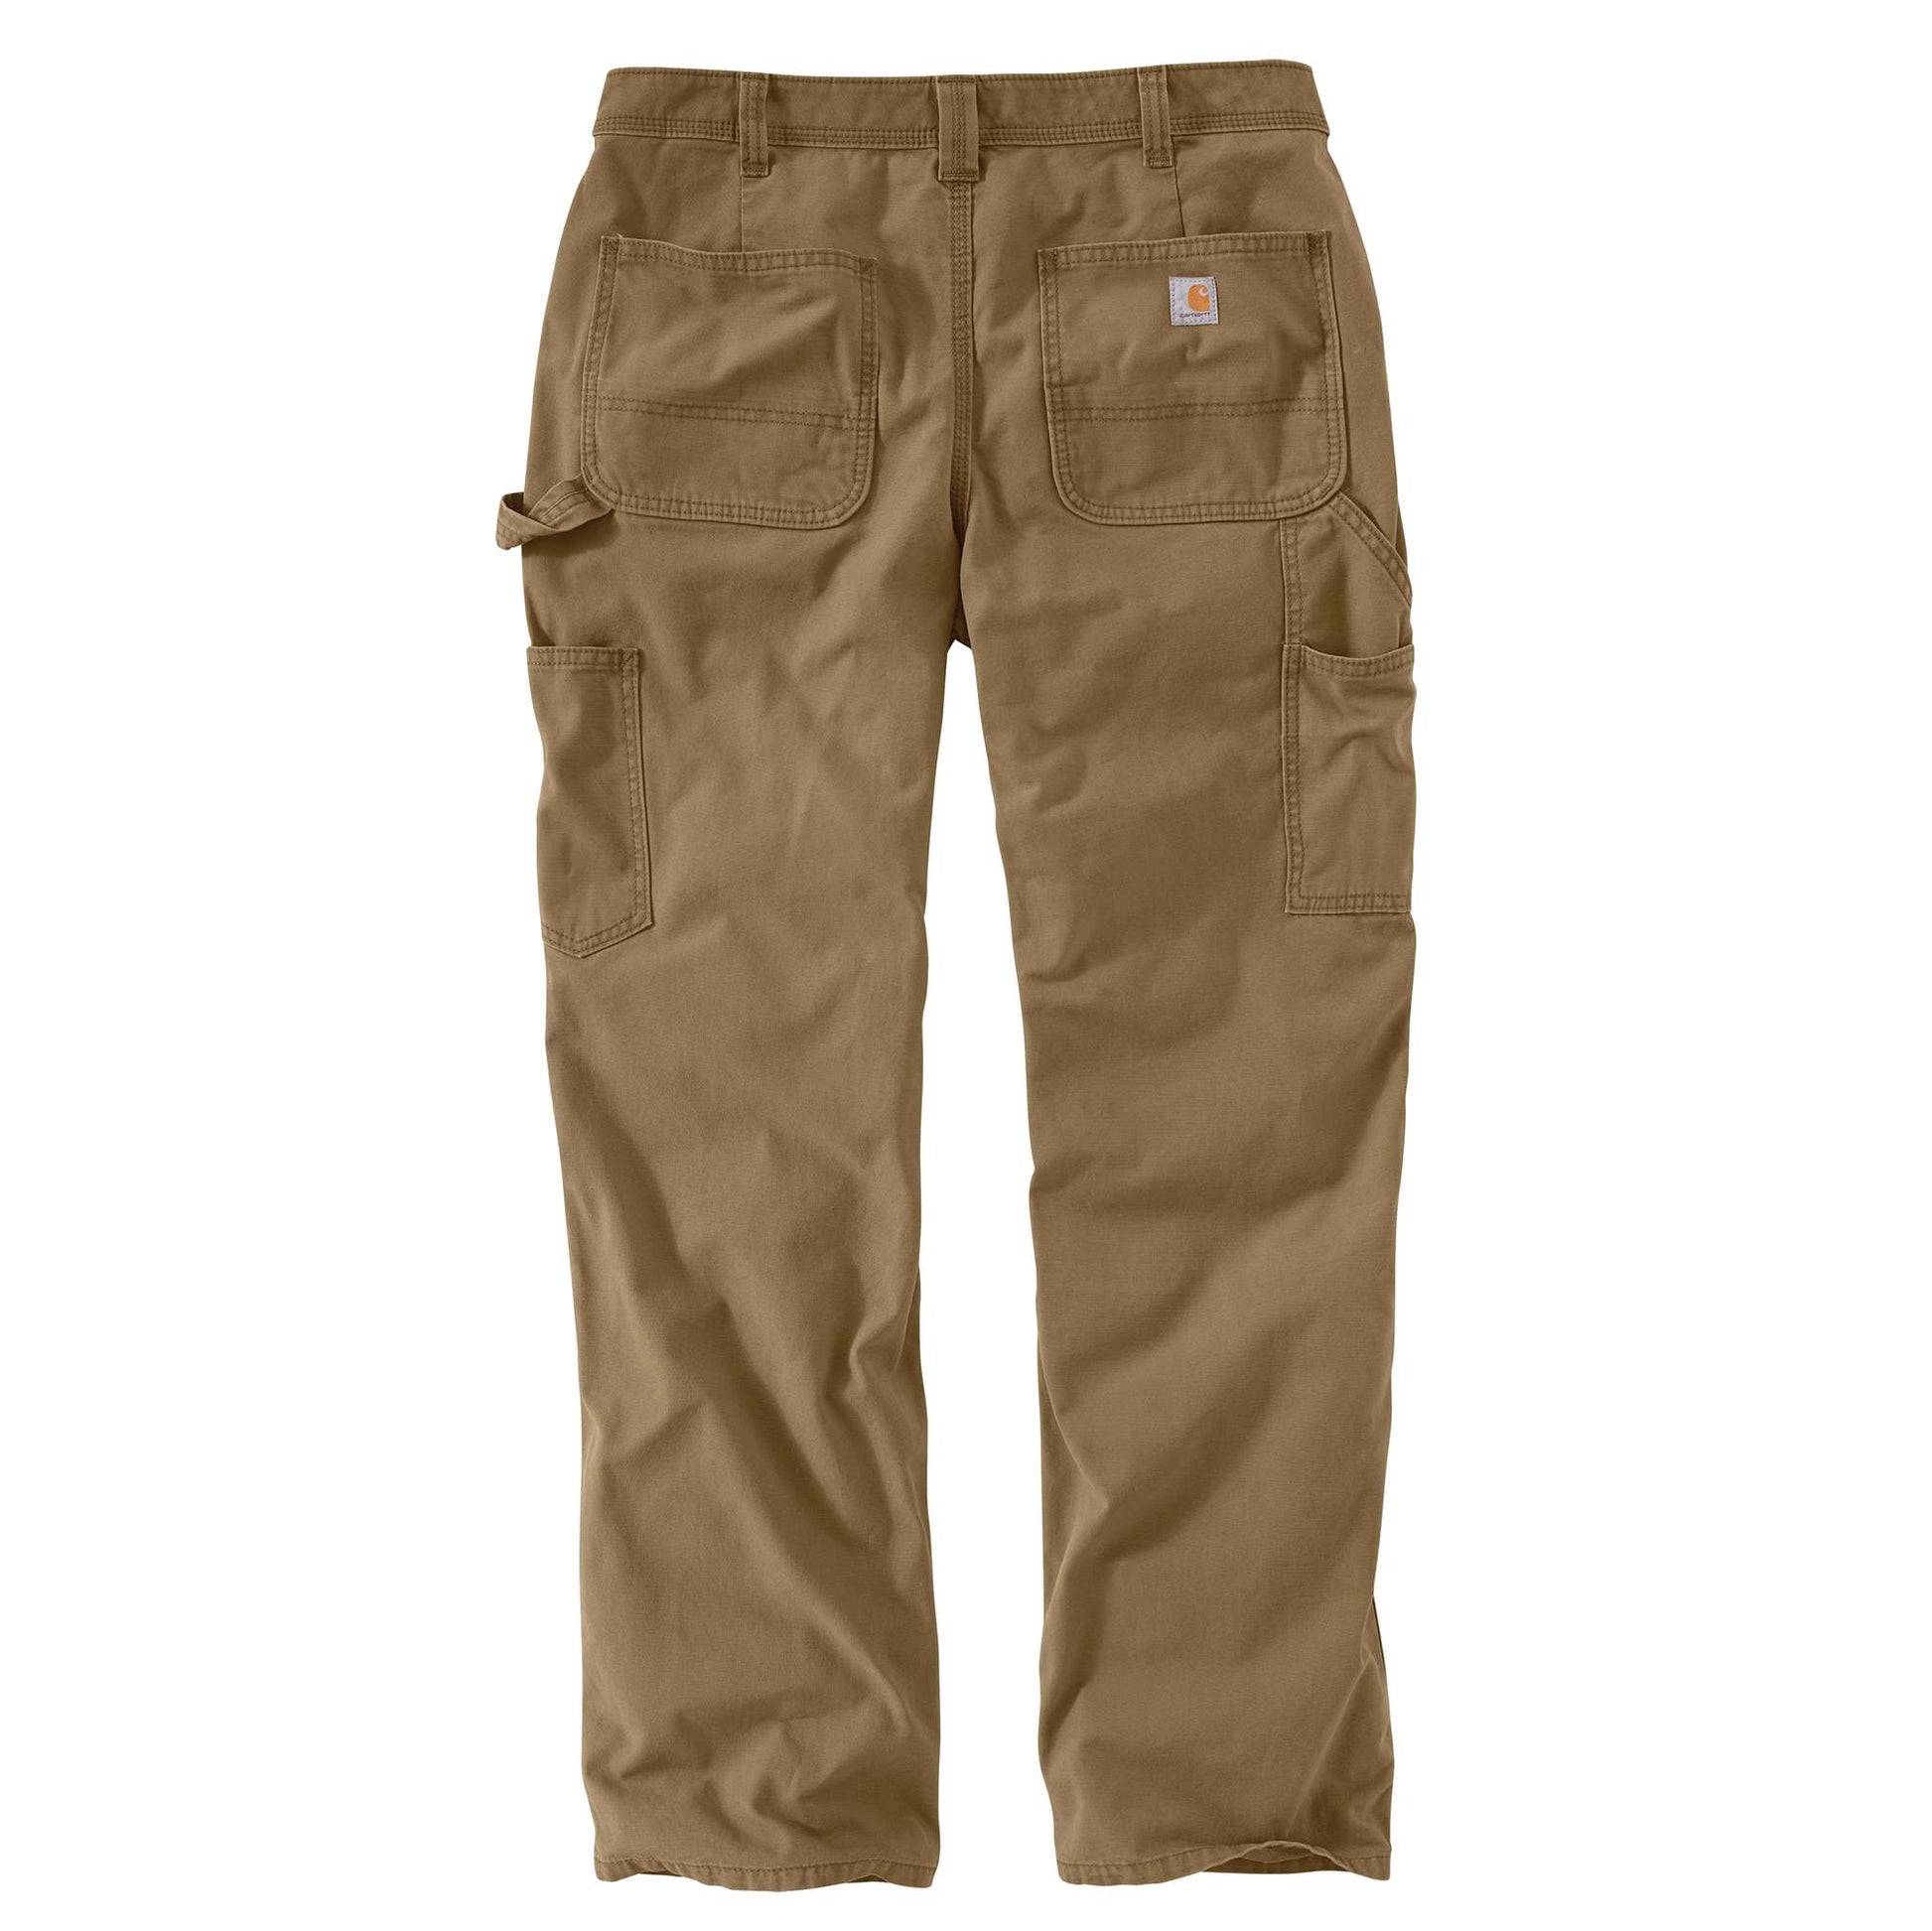 Rugged & Original Fit Work Pants For Women